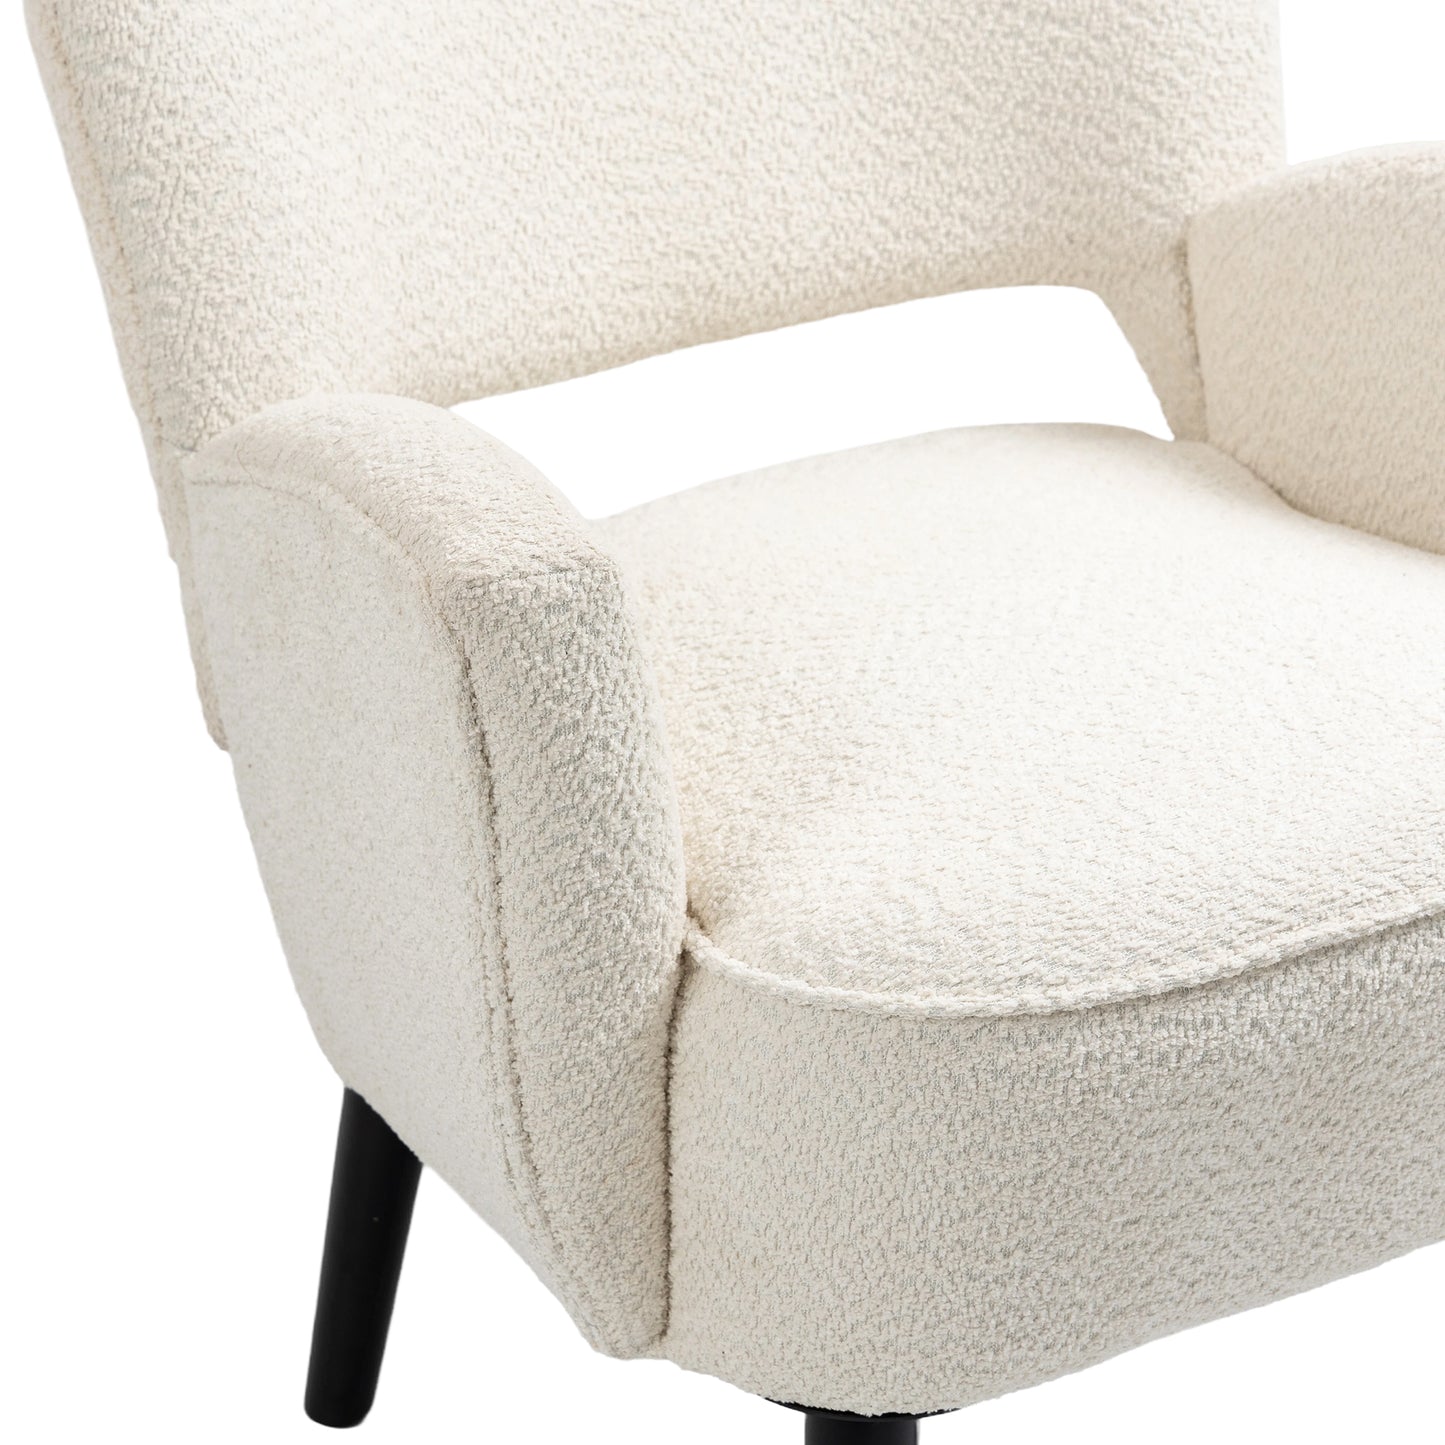 Fabric Accent Arm Chair with Upholstered seat,  backrest Chair with Solid Wood Legs, for Living Room, Bedroom, Office,Waiting Rooms